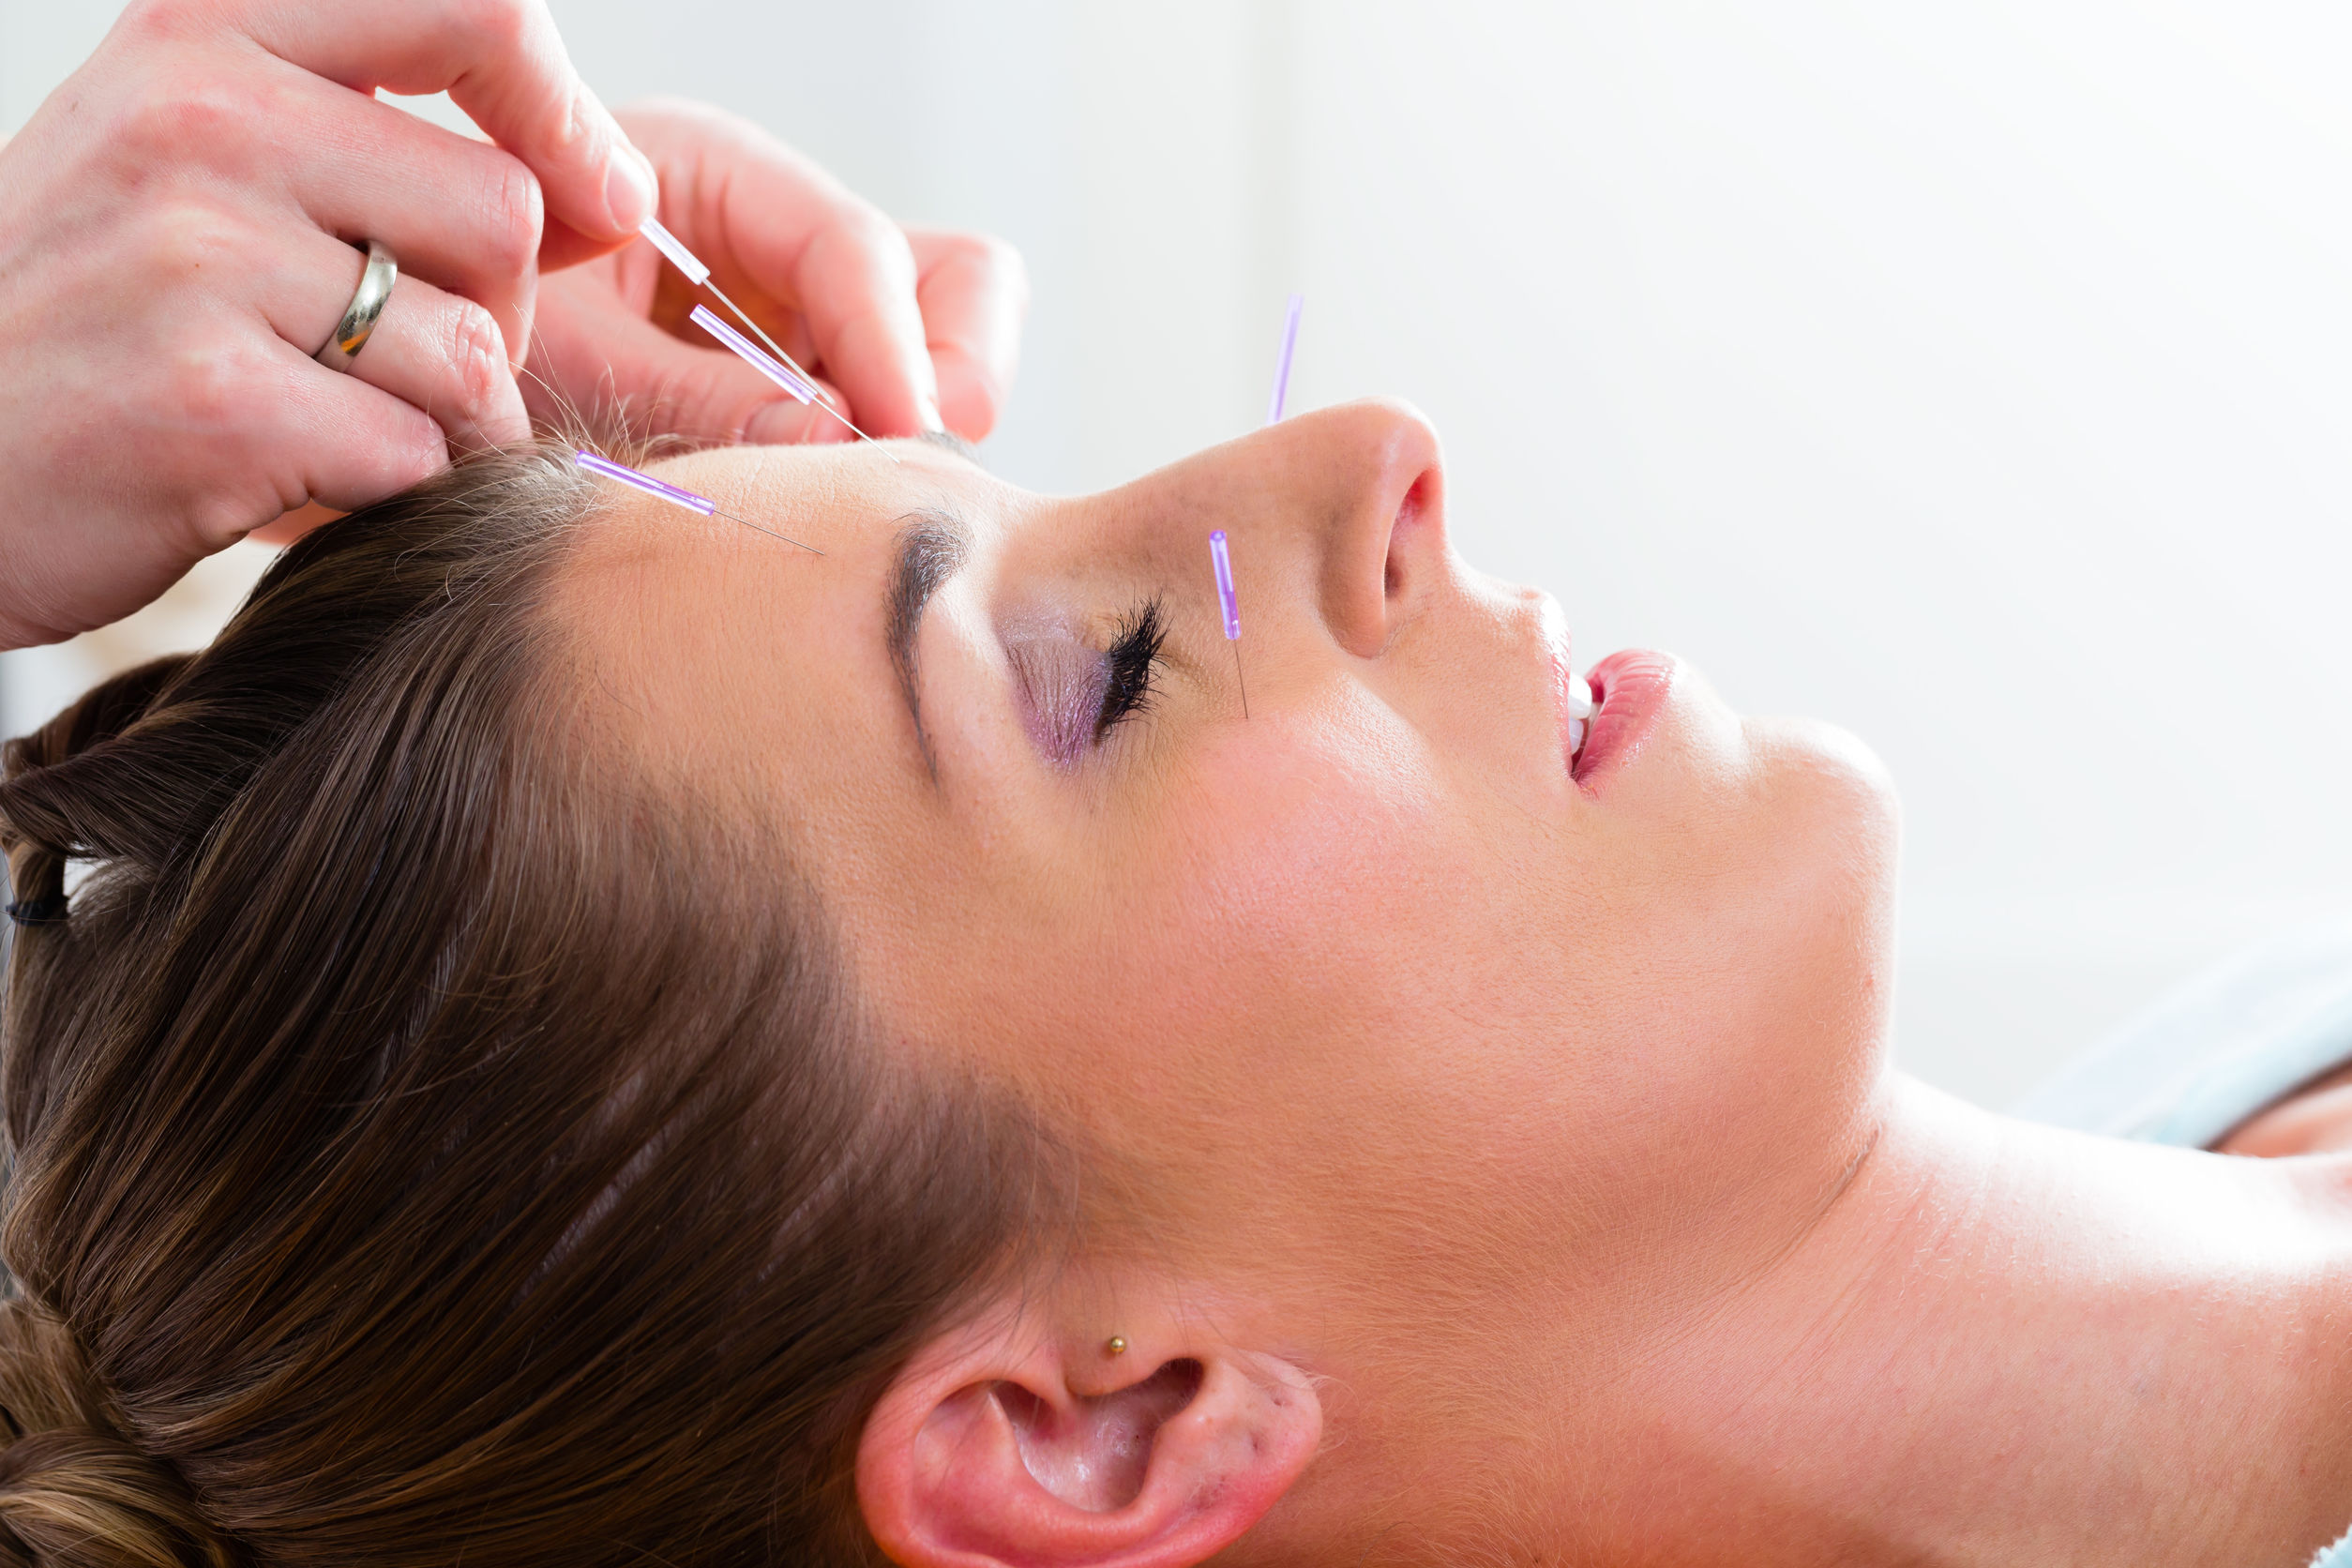 Discover facial acupuncture at the best day spa in Chicago